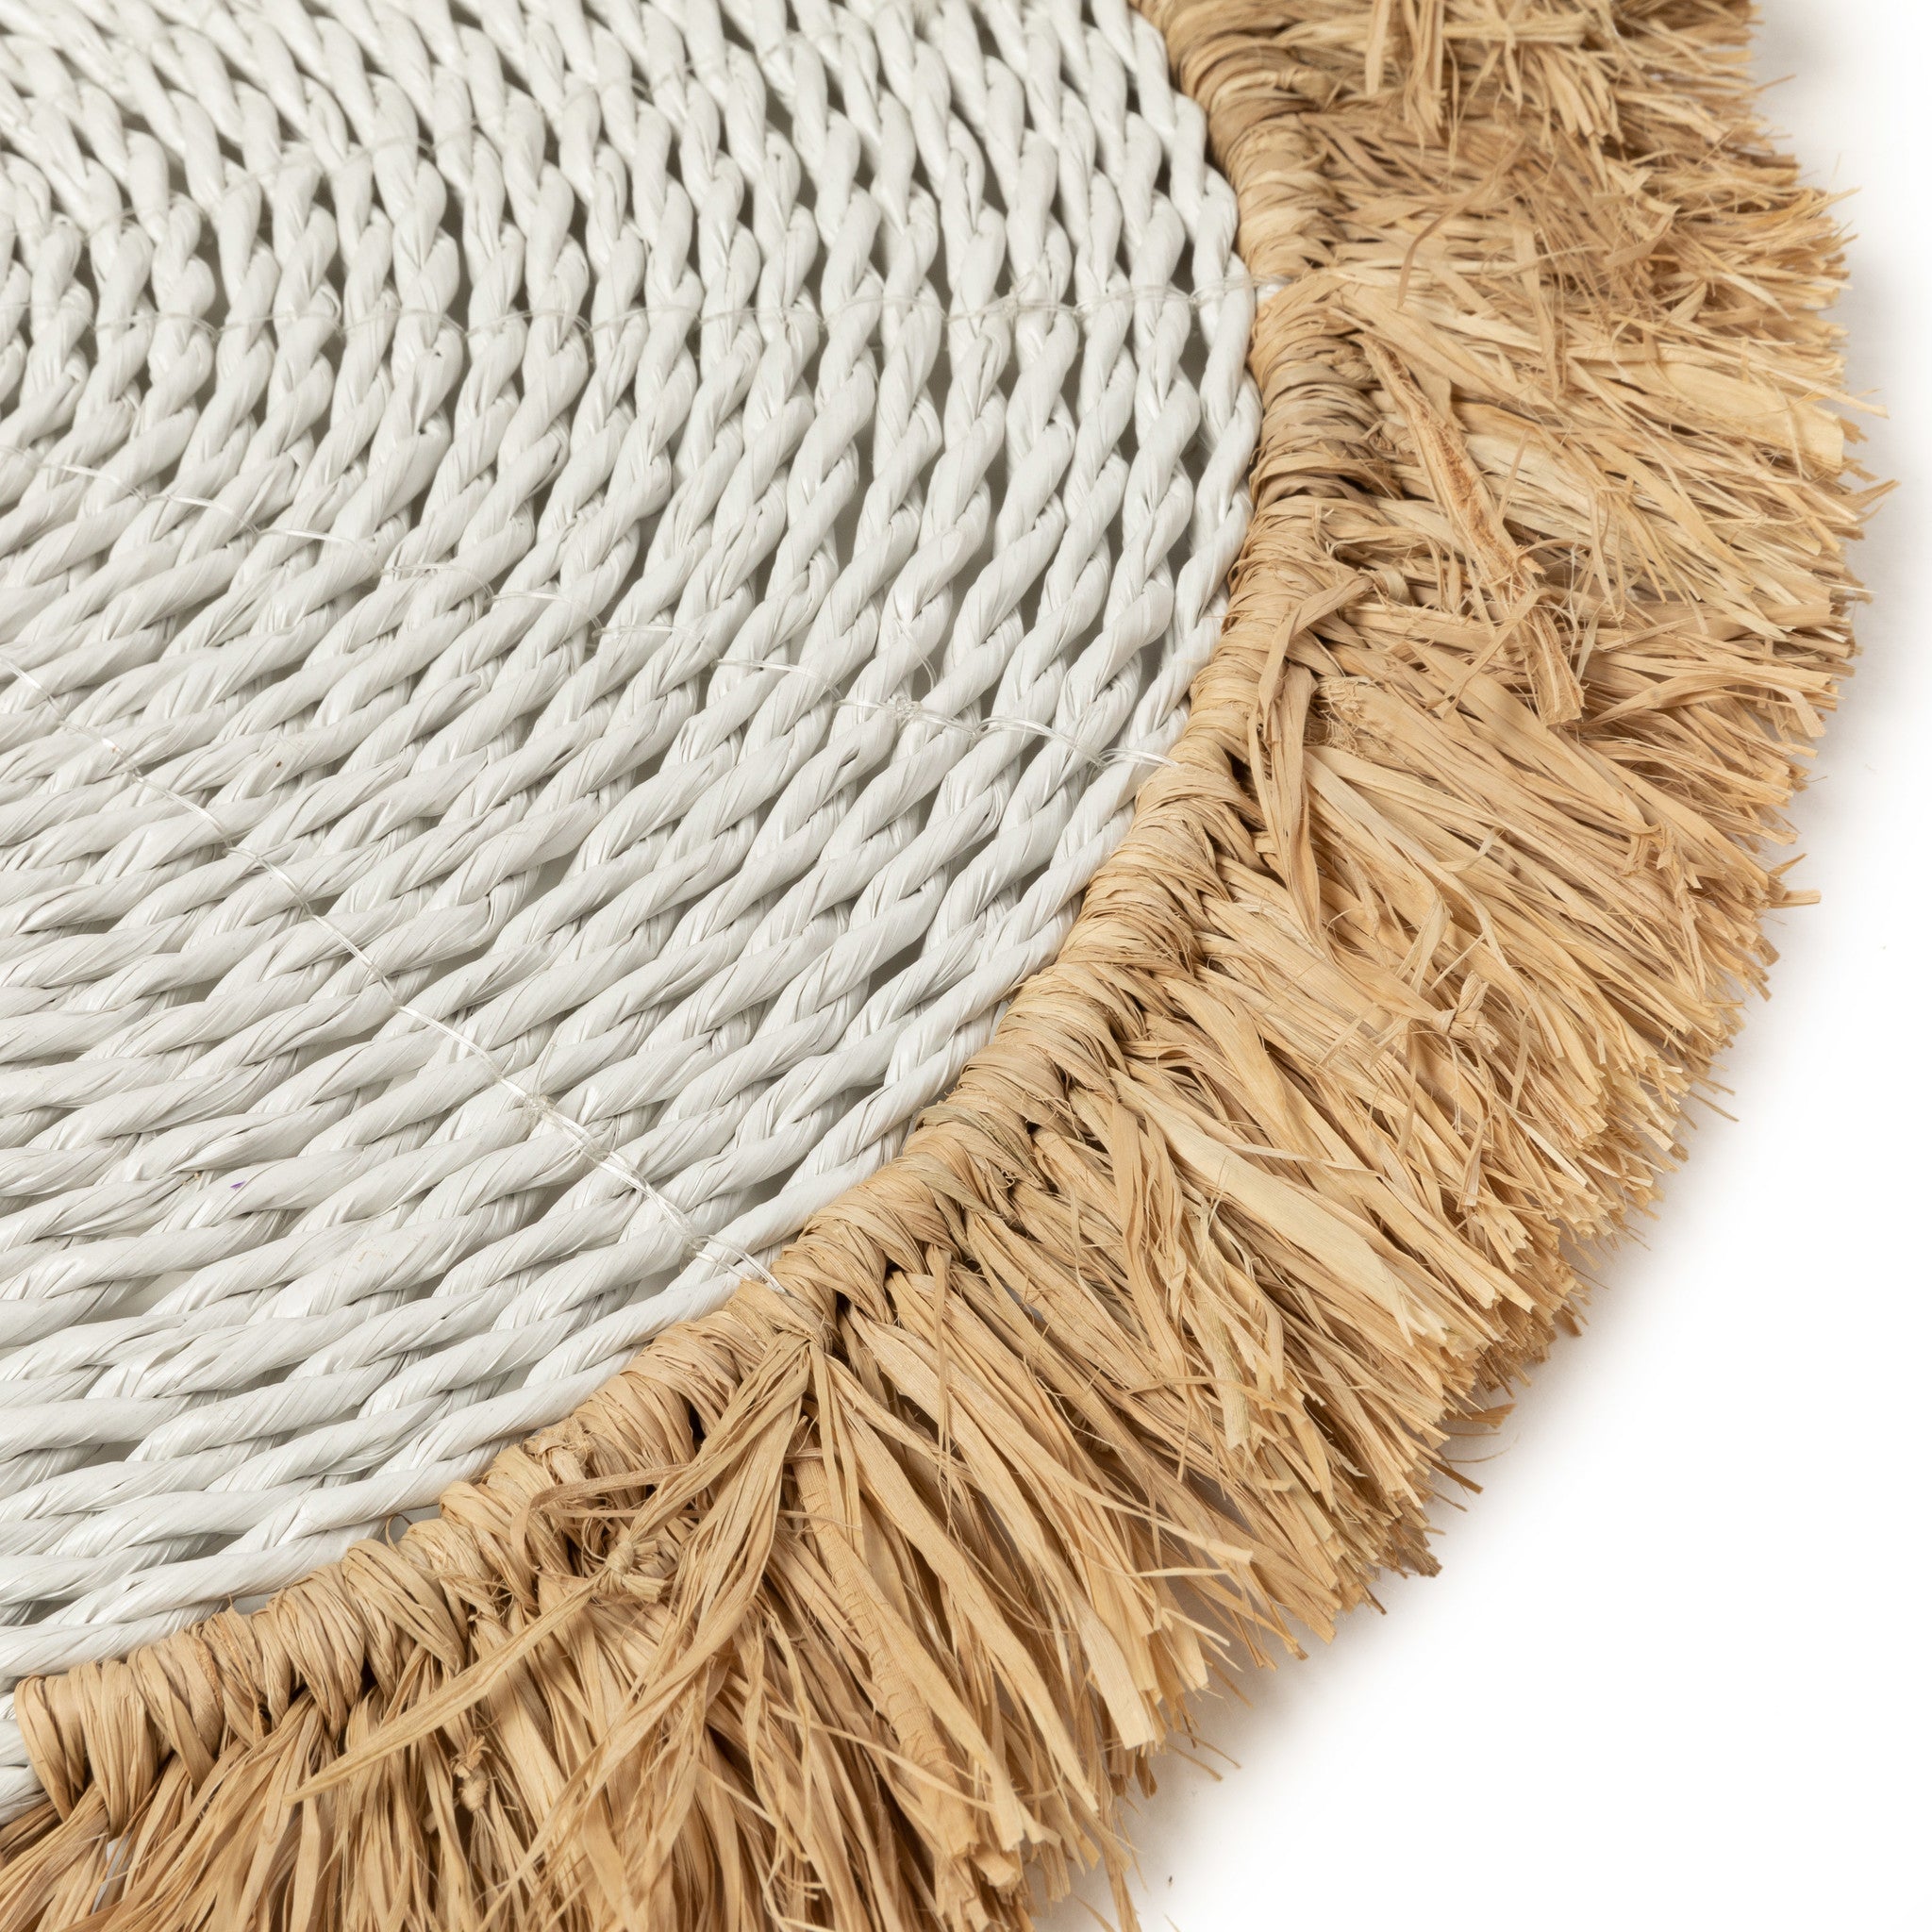 THE SEAGRASS RAFFIA Placemat White-Natural macro view